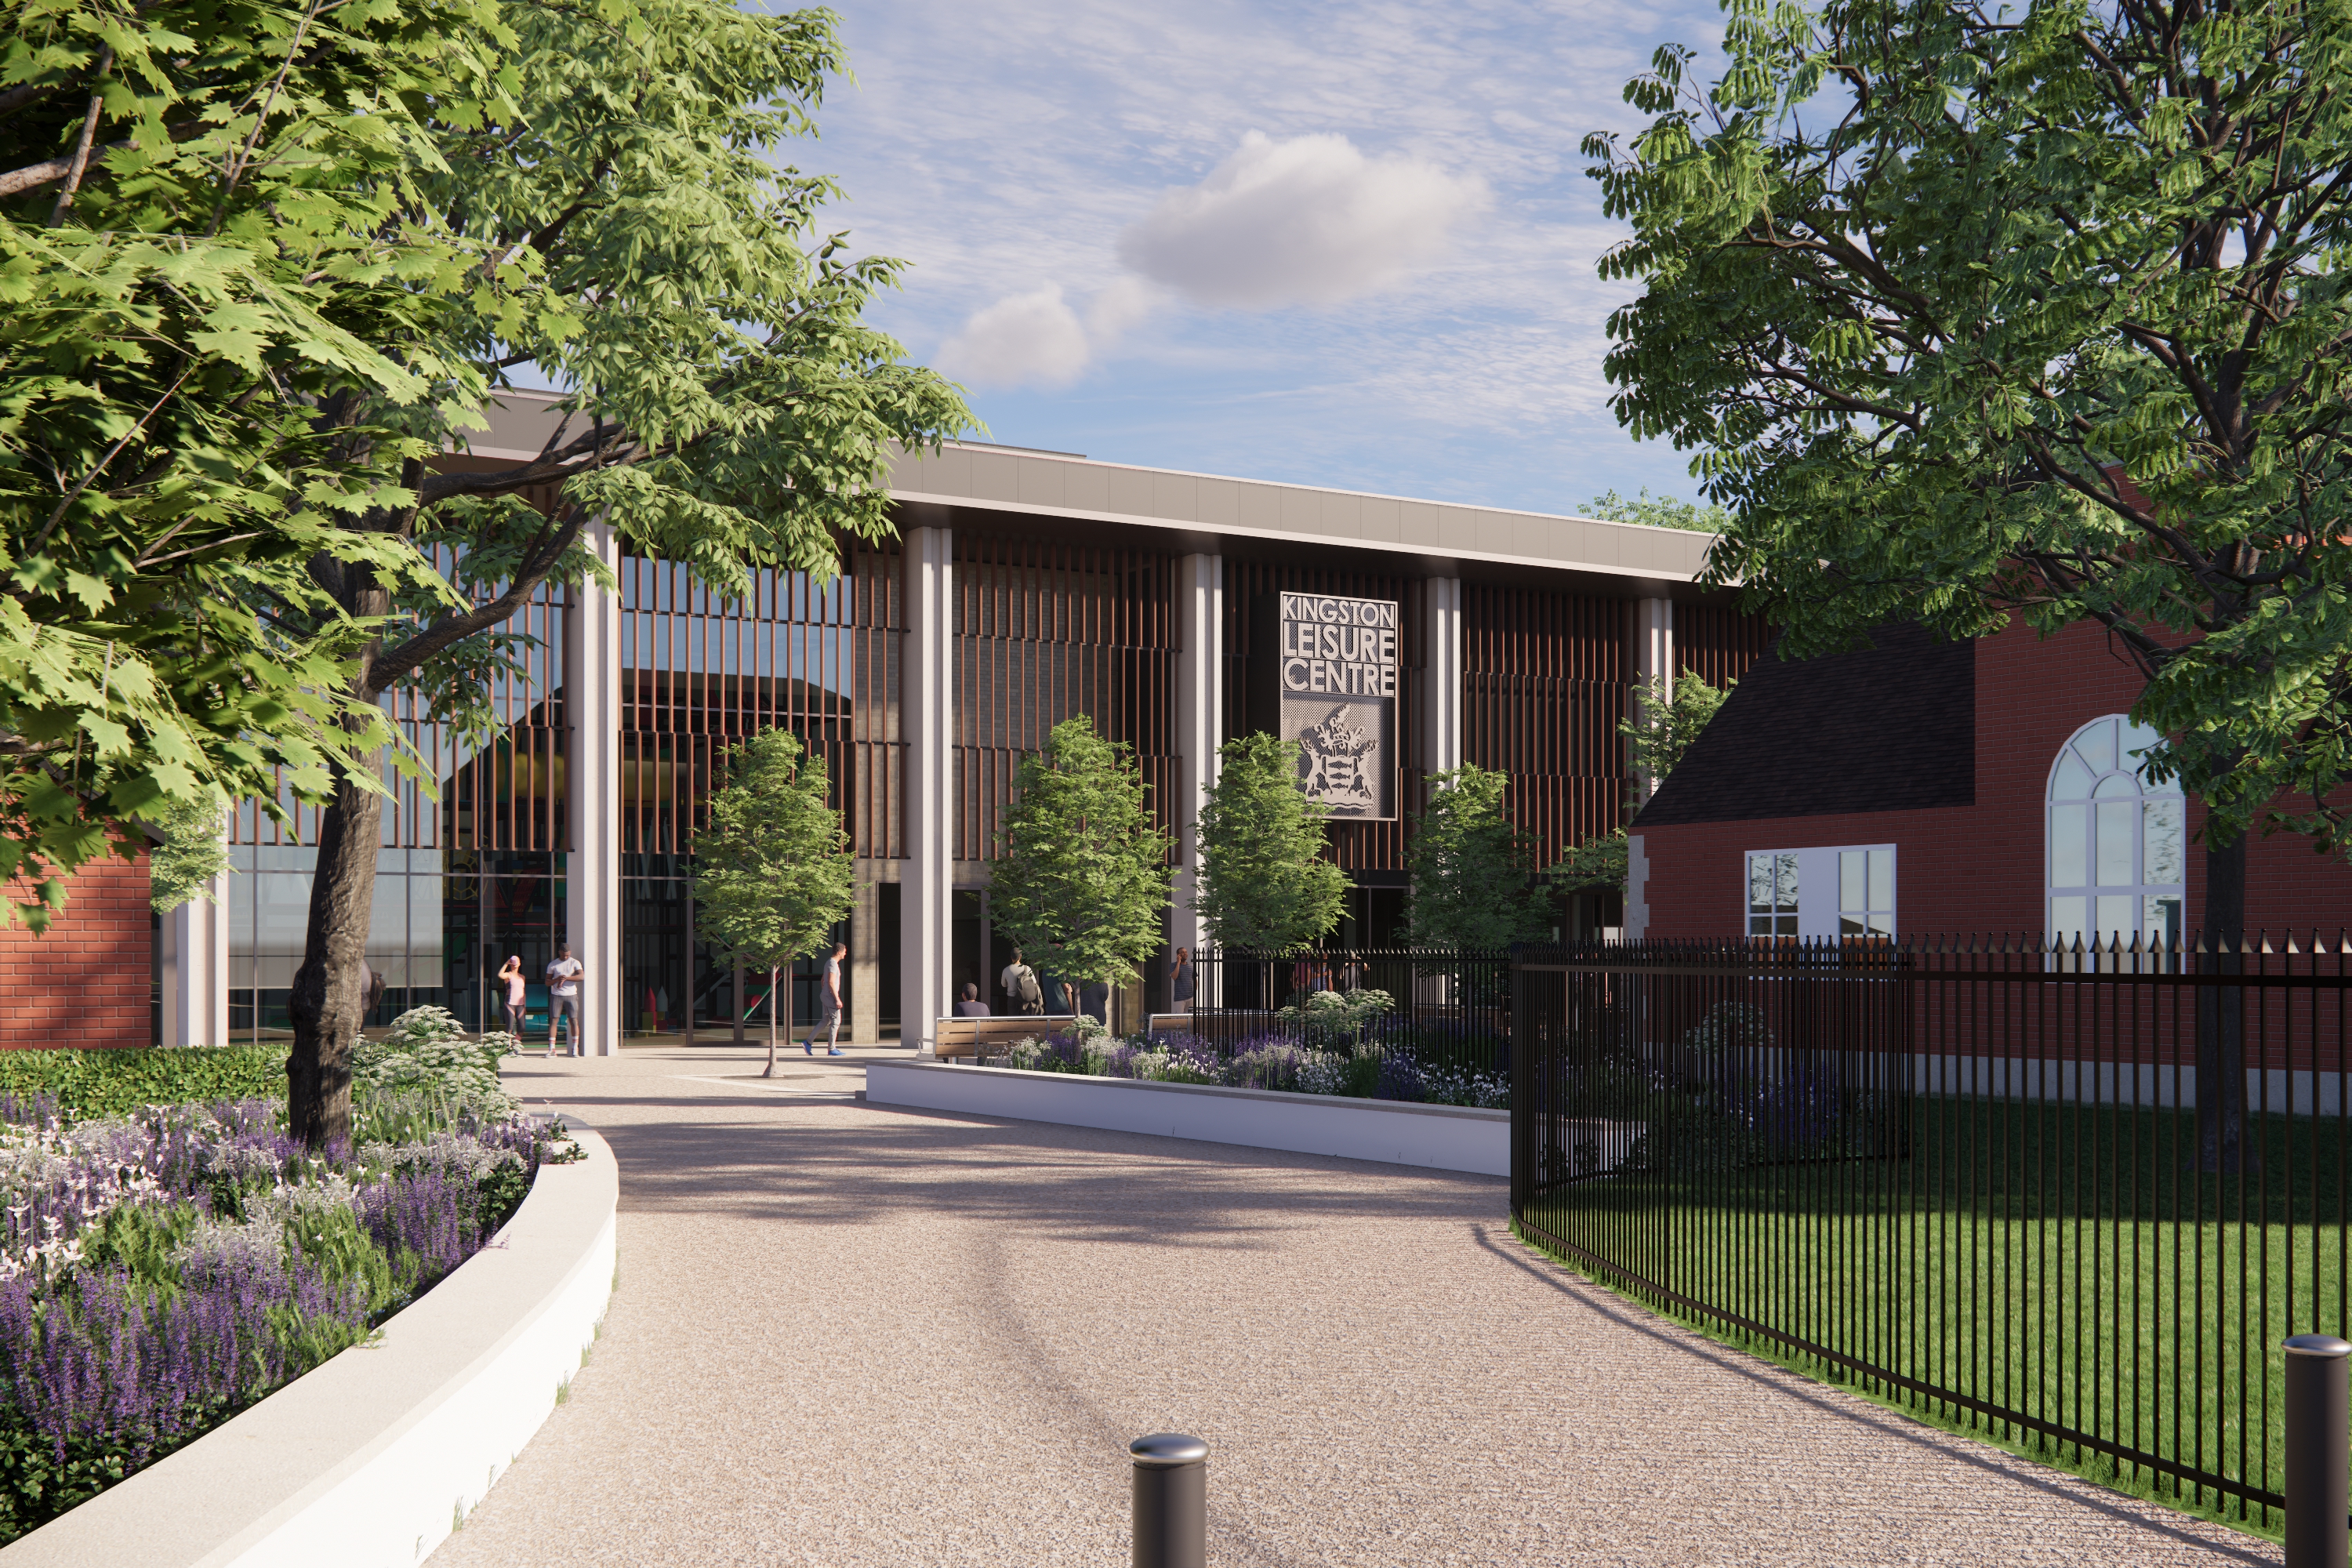 Computer generated image of the design for the new Leisure Centre in Kingston